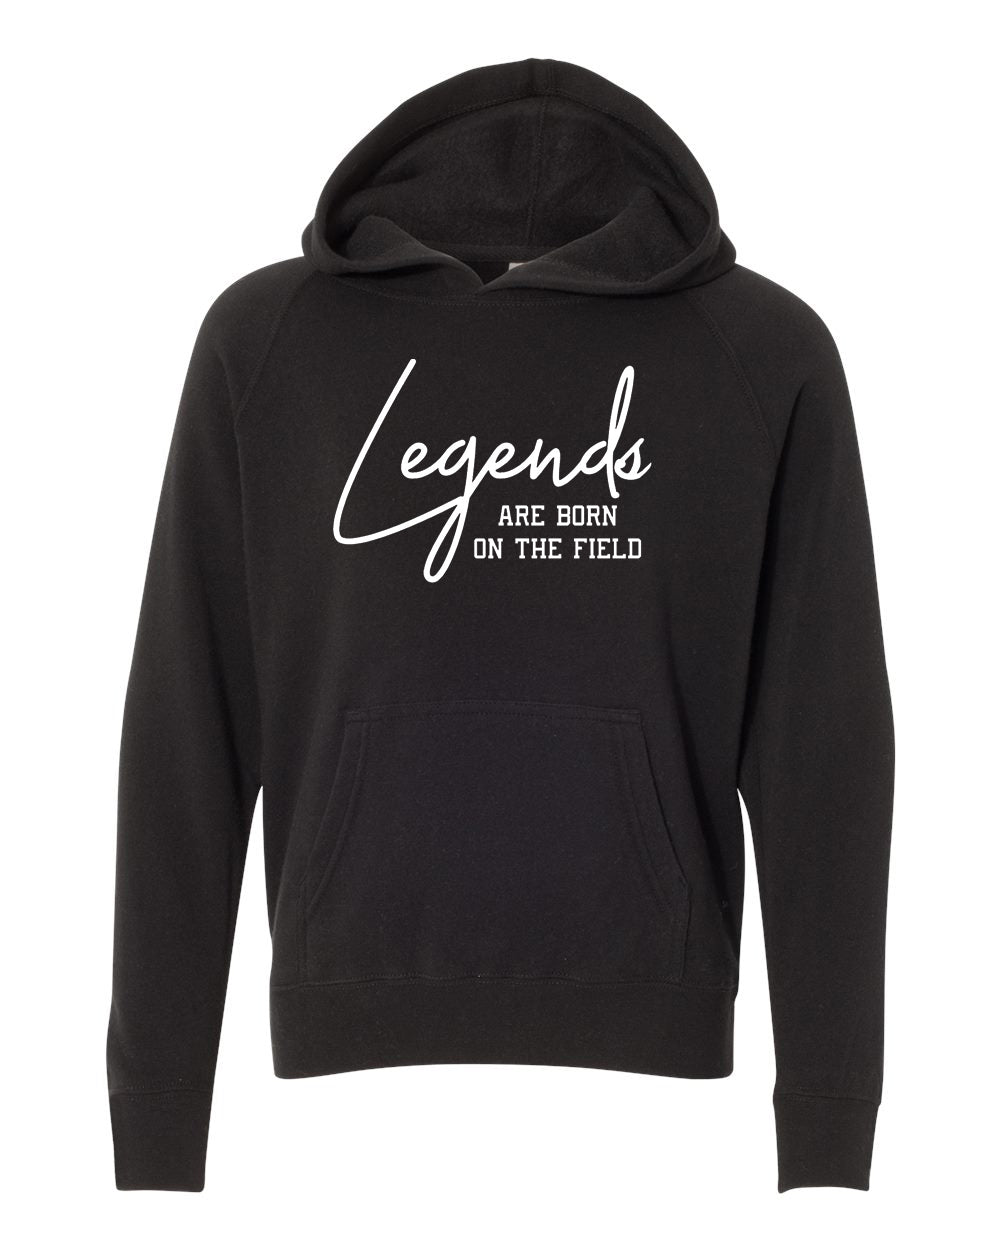 Legends Are Born On The Field Youth Hoodie